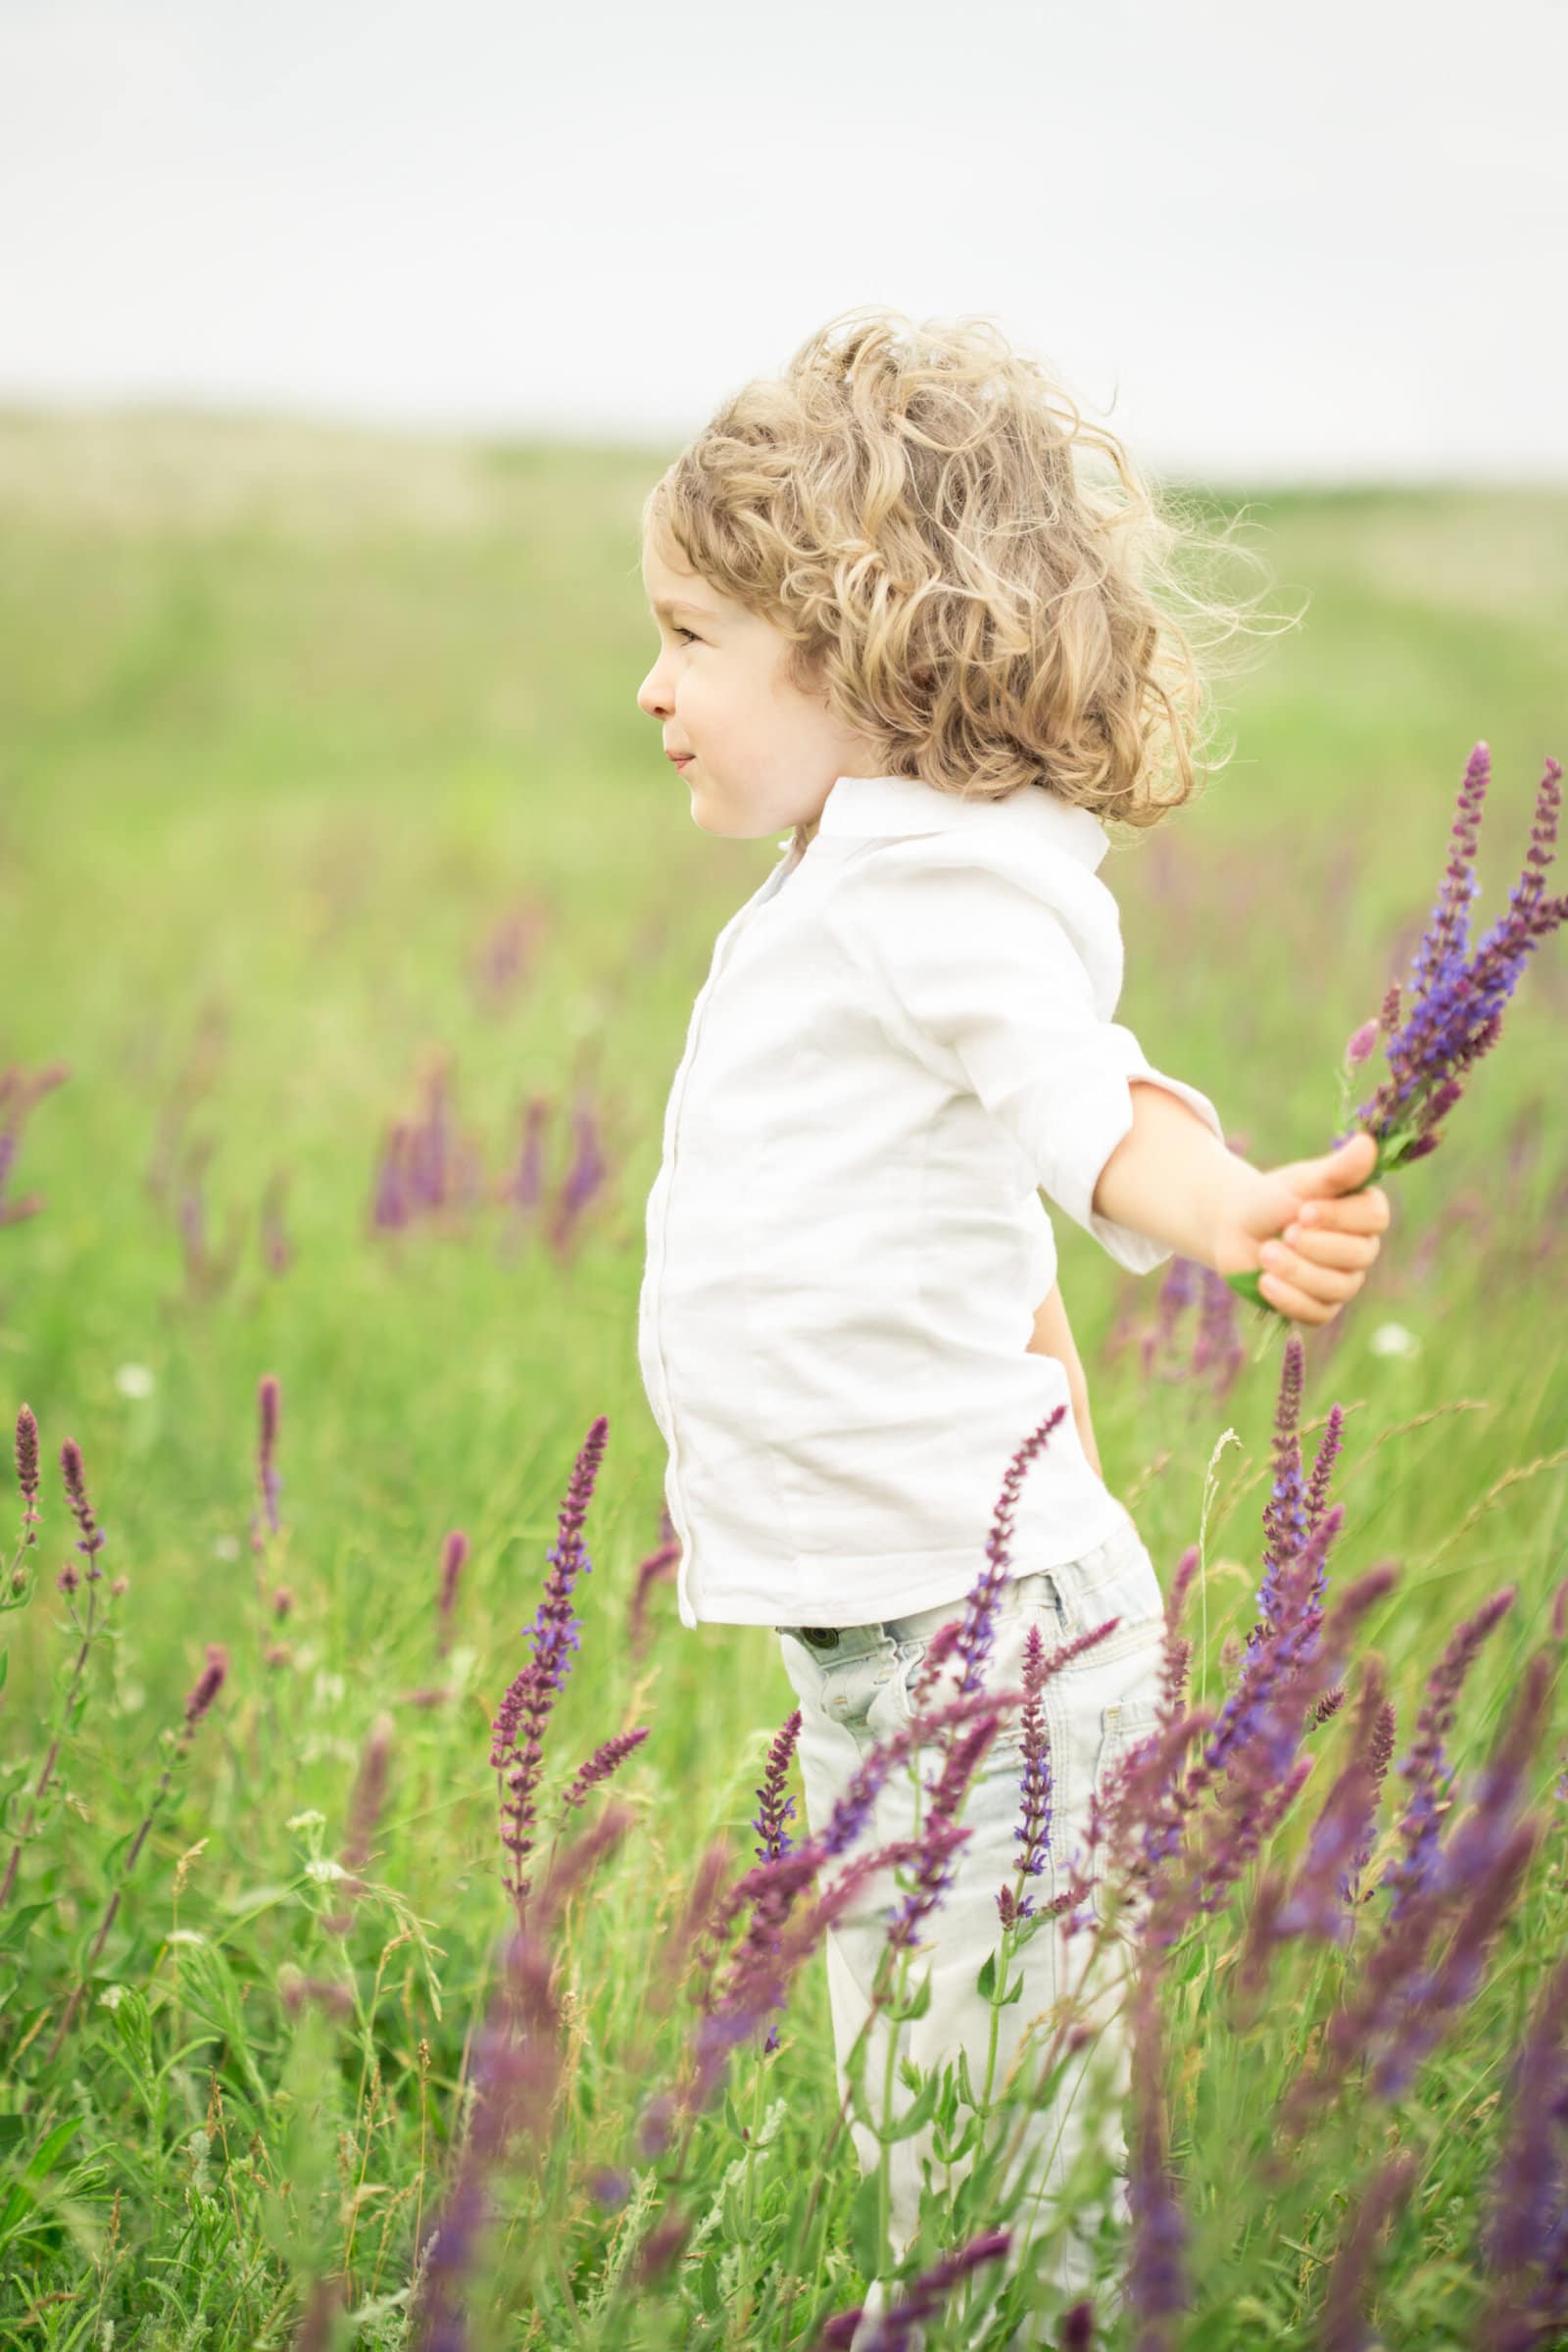 Happy child playing outdoors in spring field. Healthy lifestyles concept